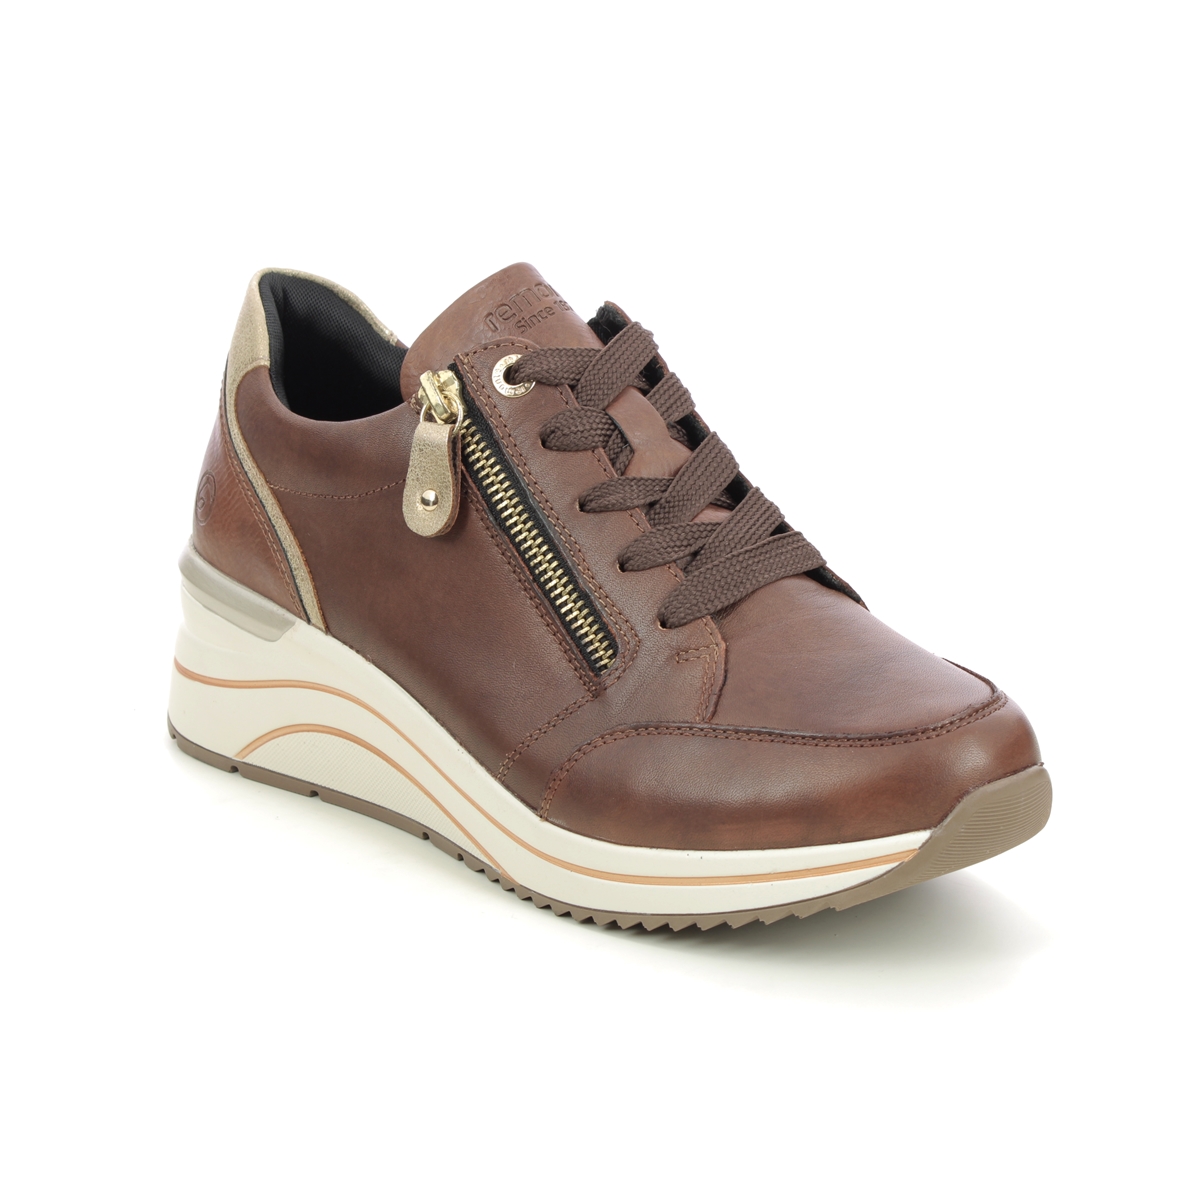 Remonte Ranzip Wedge Tan Leather Womens Trainers D0T03-22 In Size 40 In Plain Tan Leather